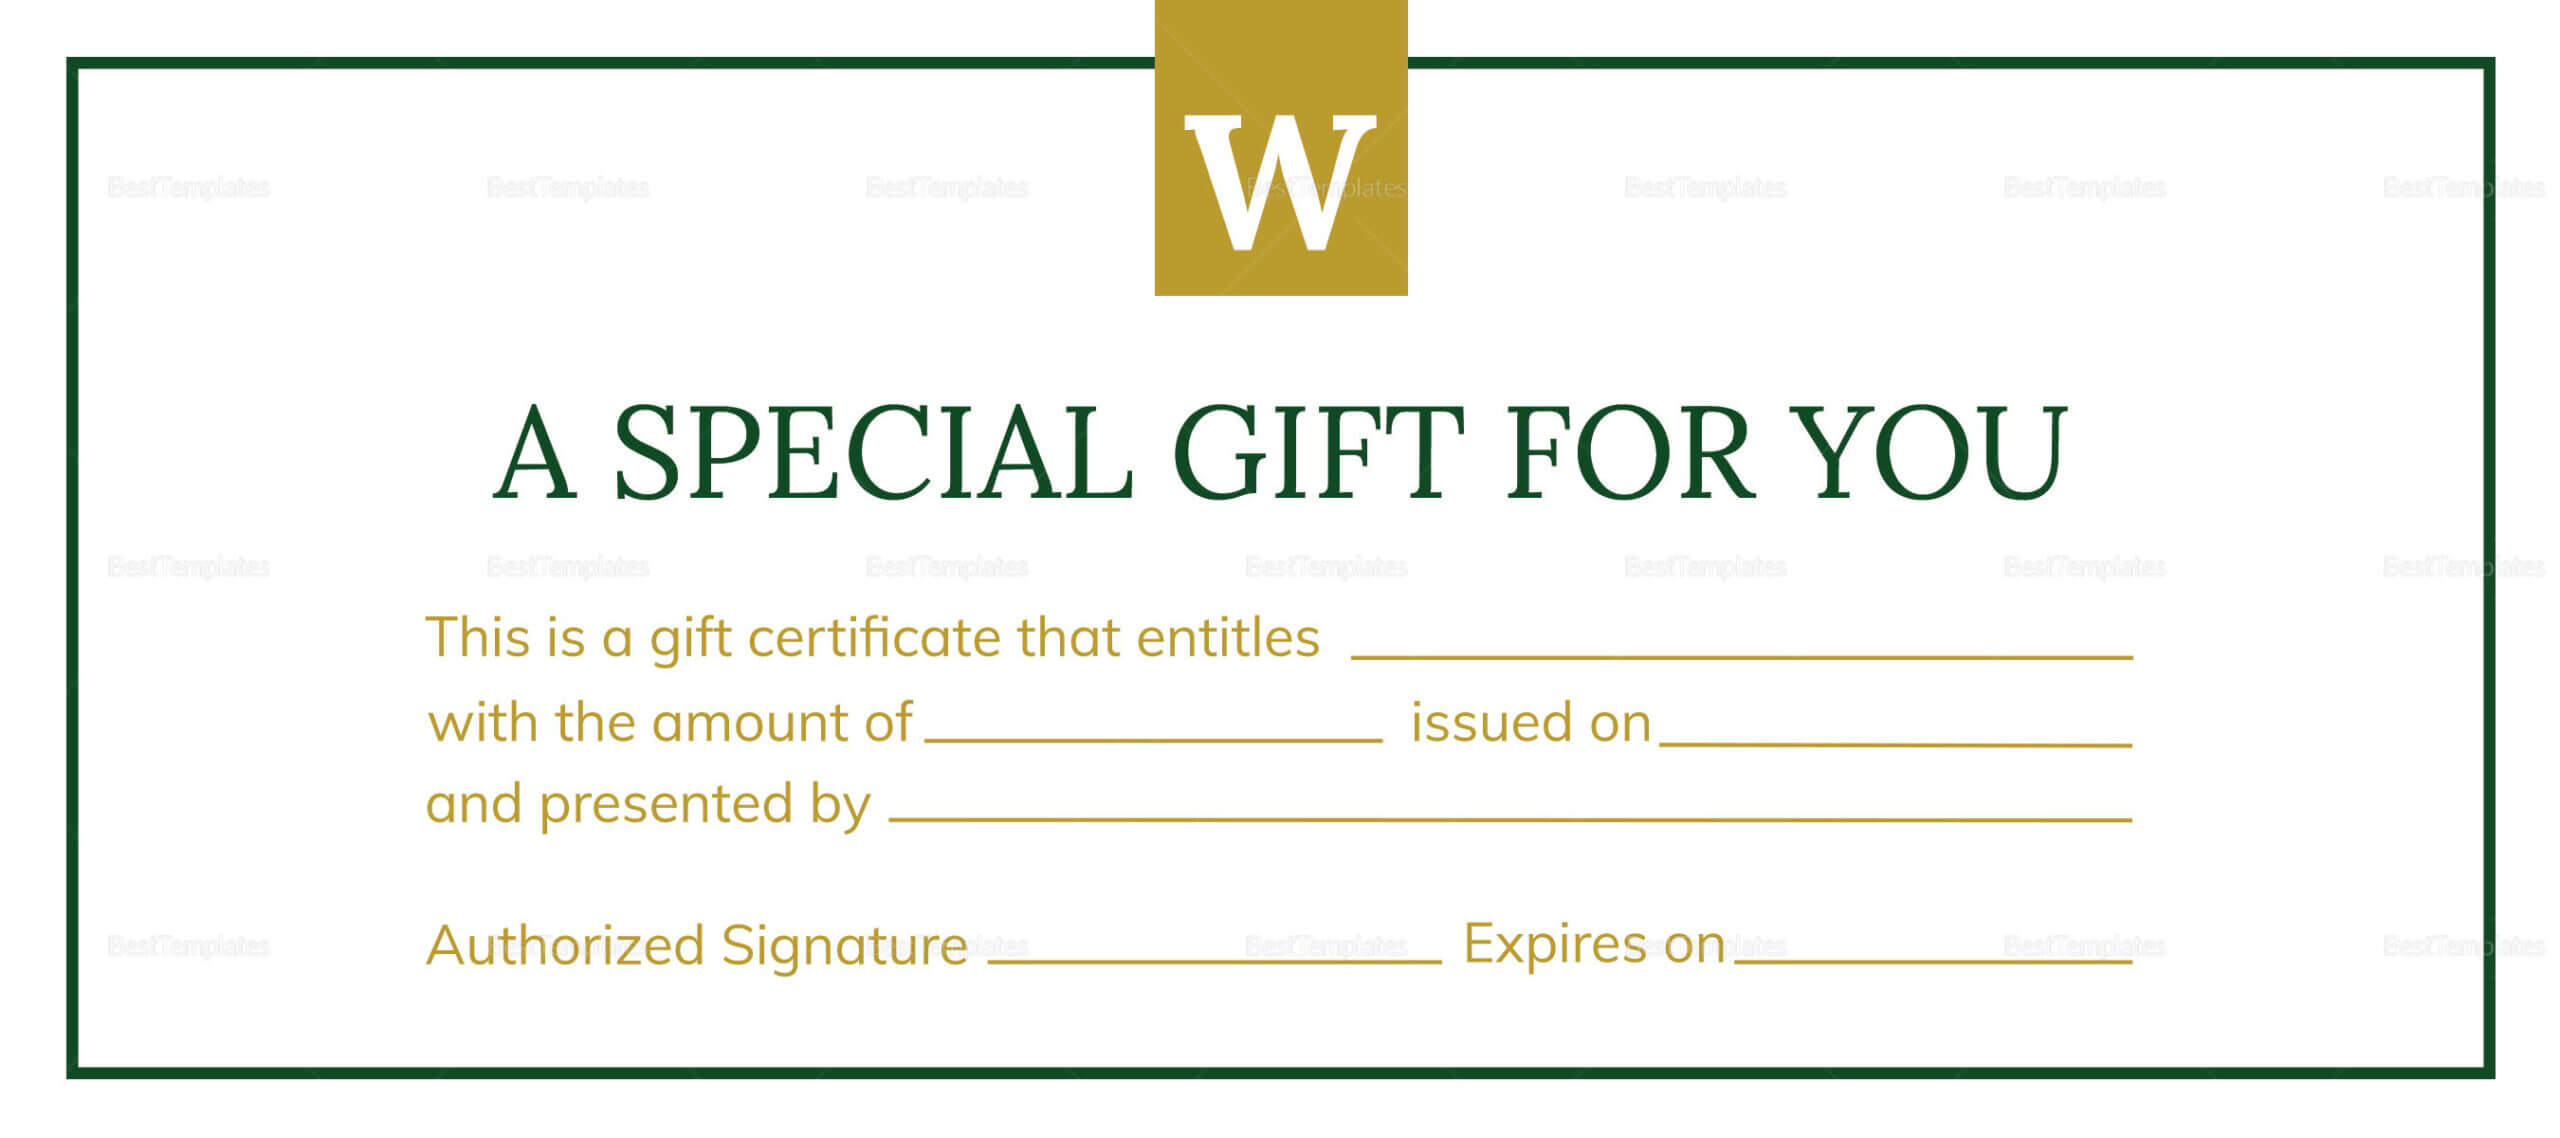 Hotel Gift Certificate Template With Gift Certificate Template Indesign